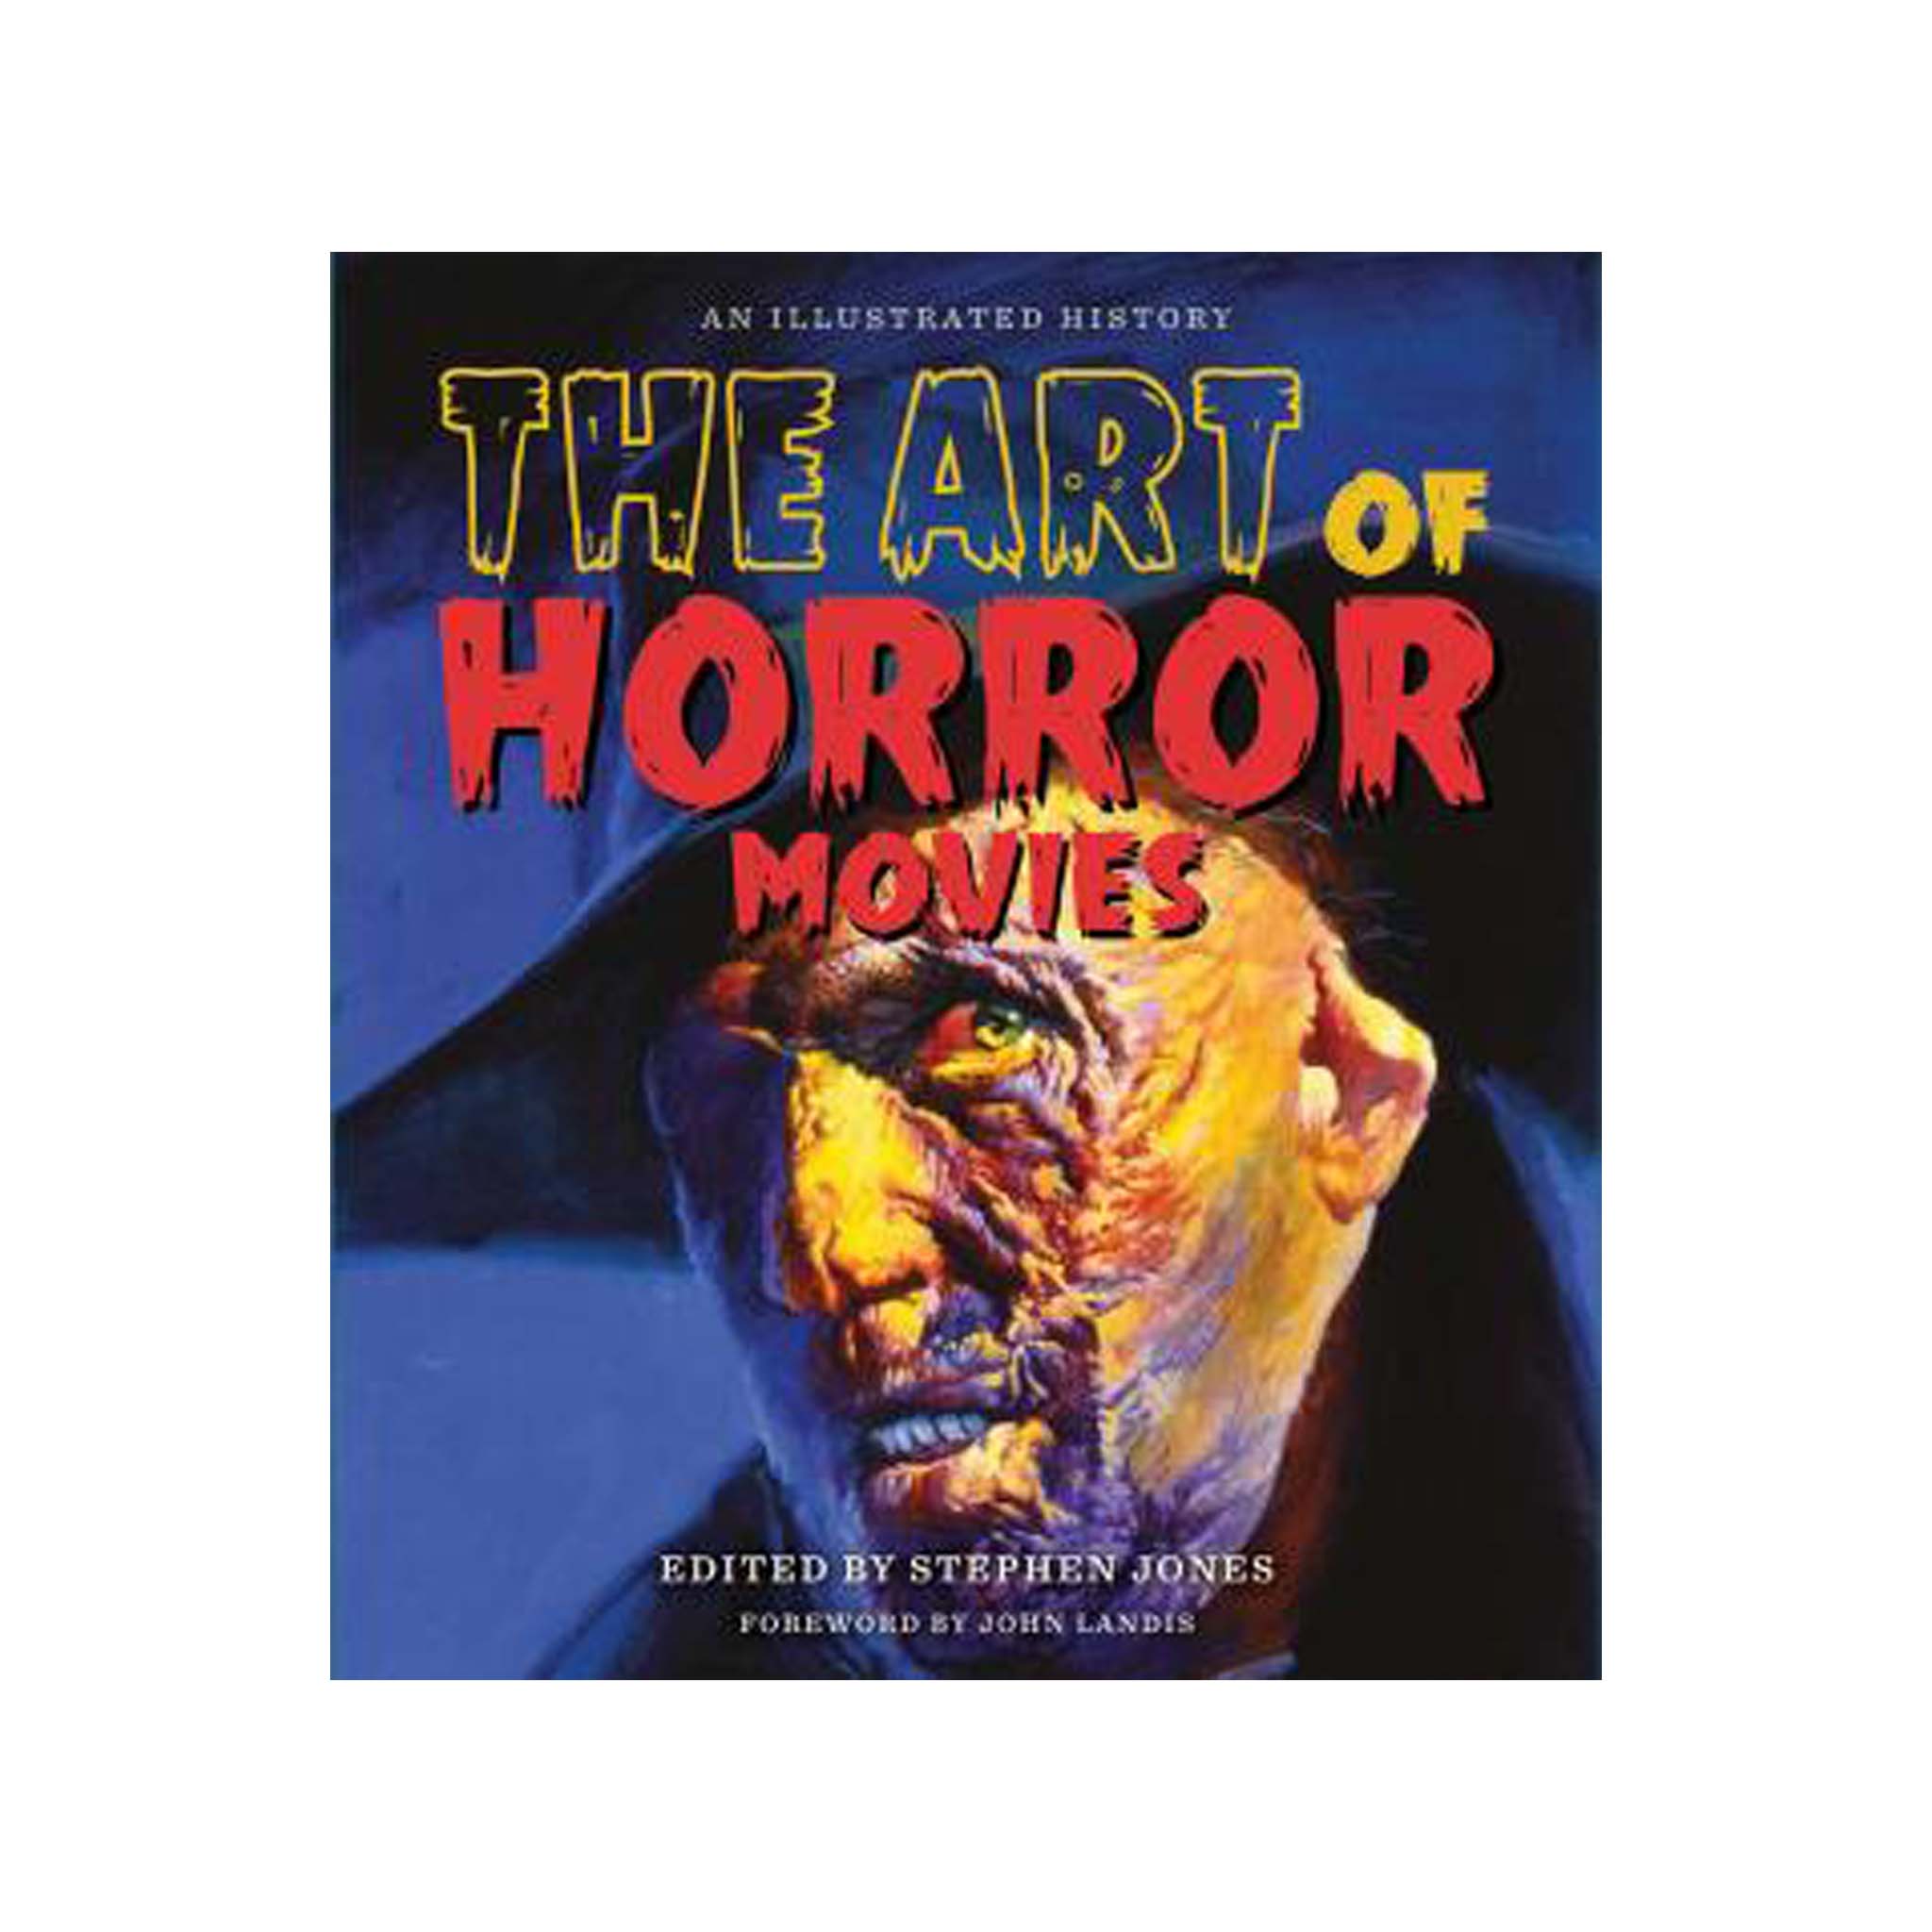 ART OF HORROR MOVIES: AN ILLUSTRATED HISTORY